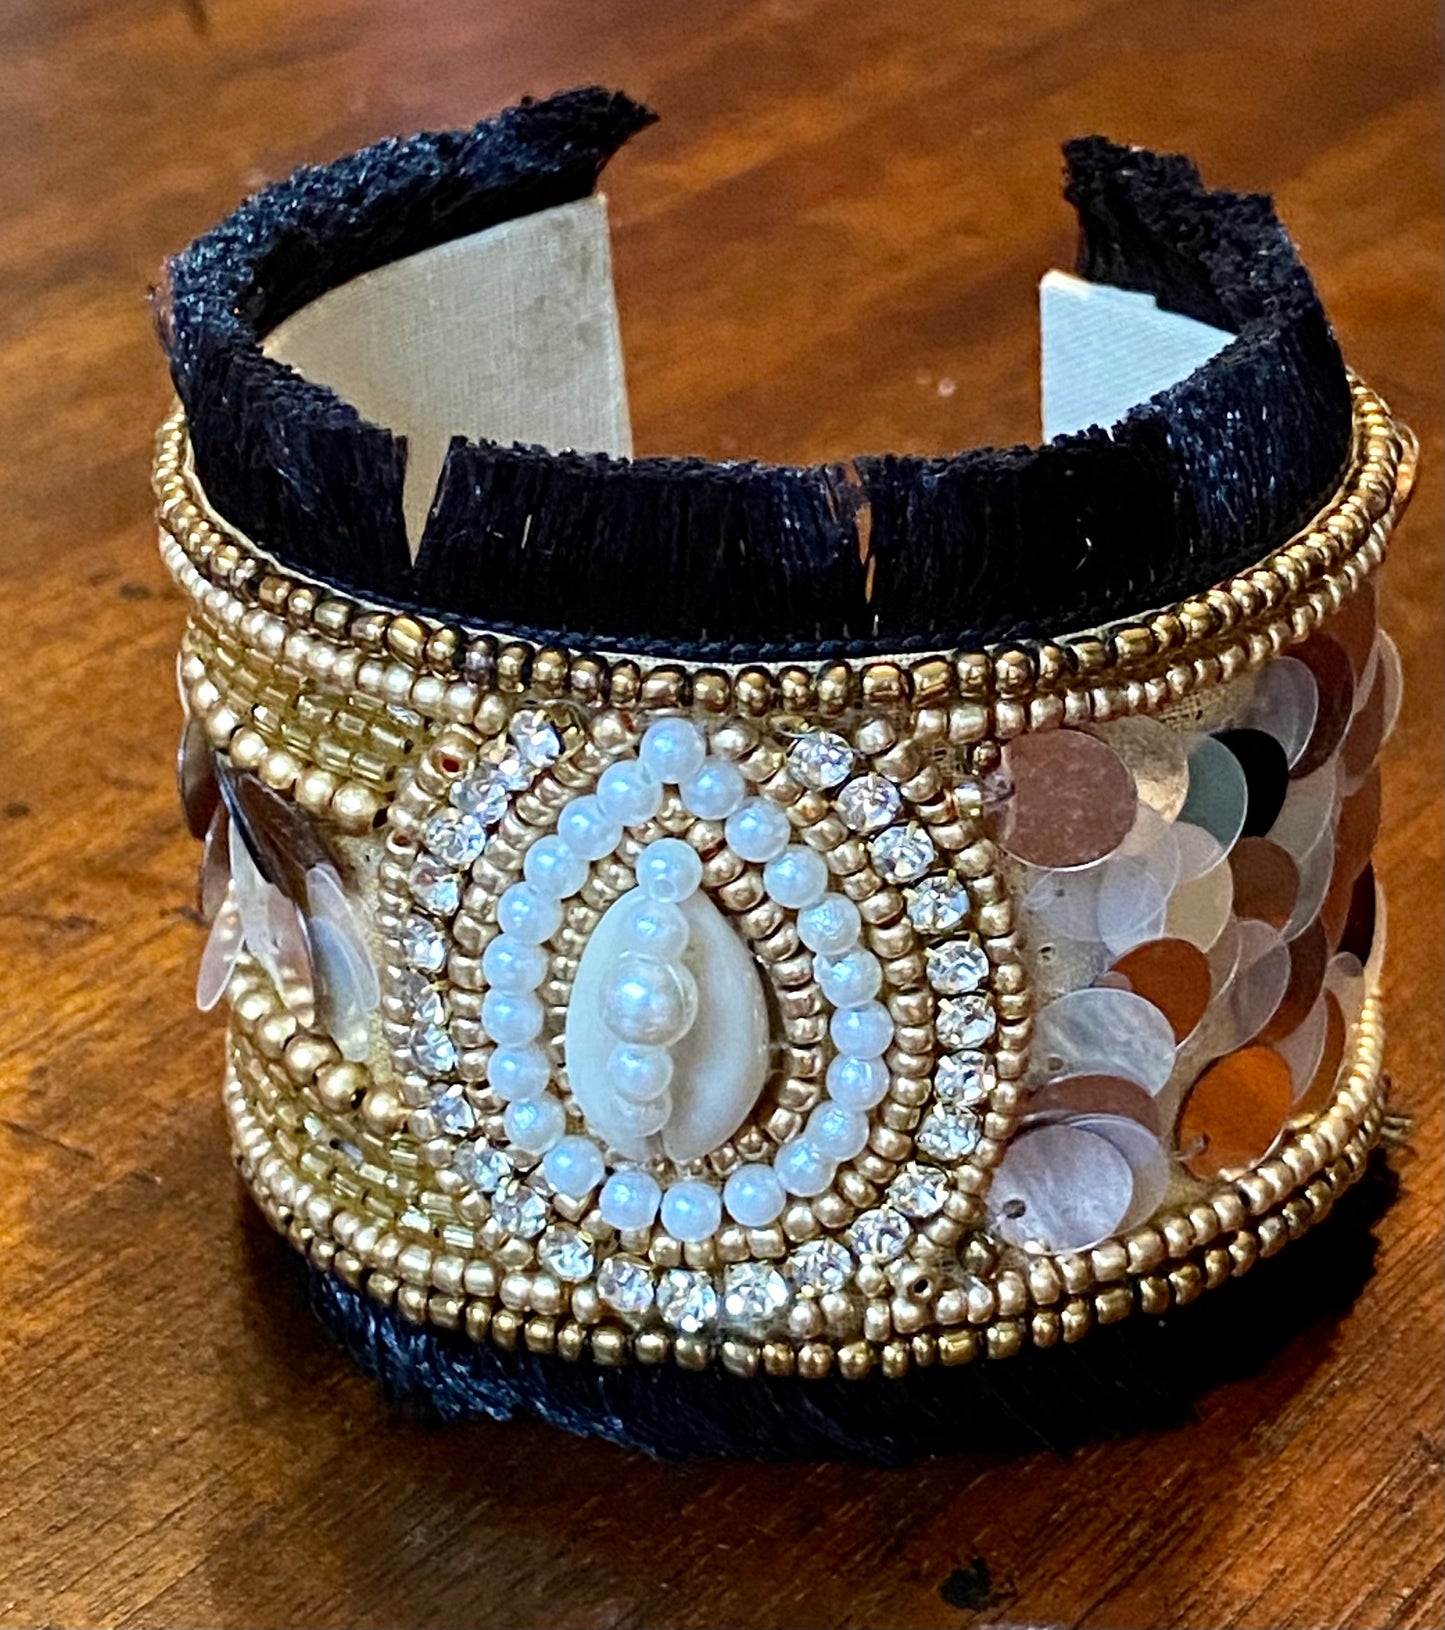 Ladies' Handcrafted Bead and Sequin Cuff